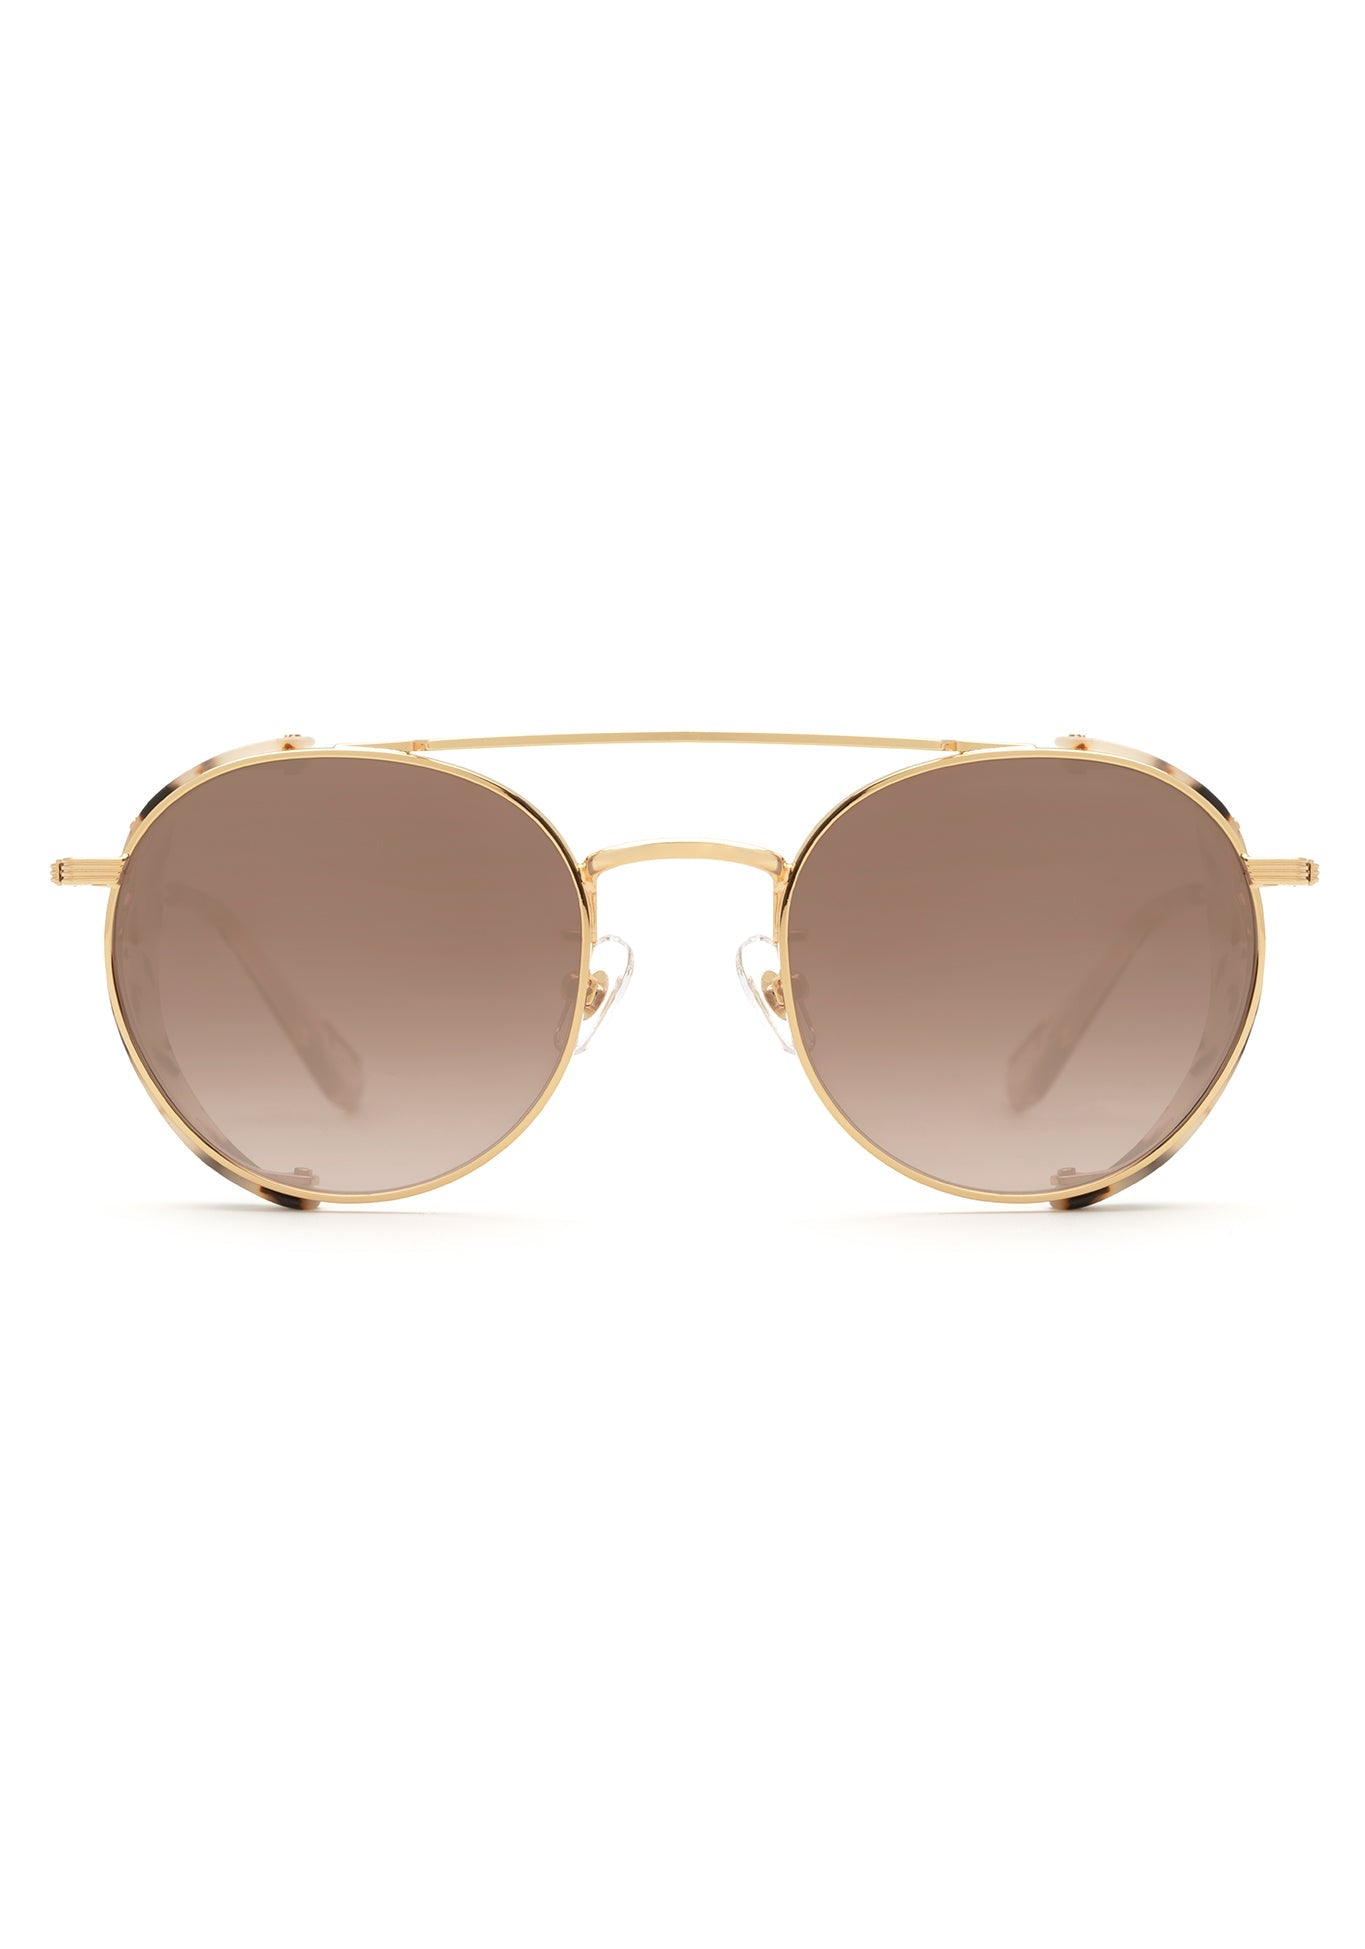 TCHOUP BLINKER | 24K + Matte Oyster Mirrored Handcrafted, luxury tortoise shell acetate with stainless steel